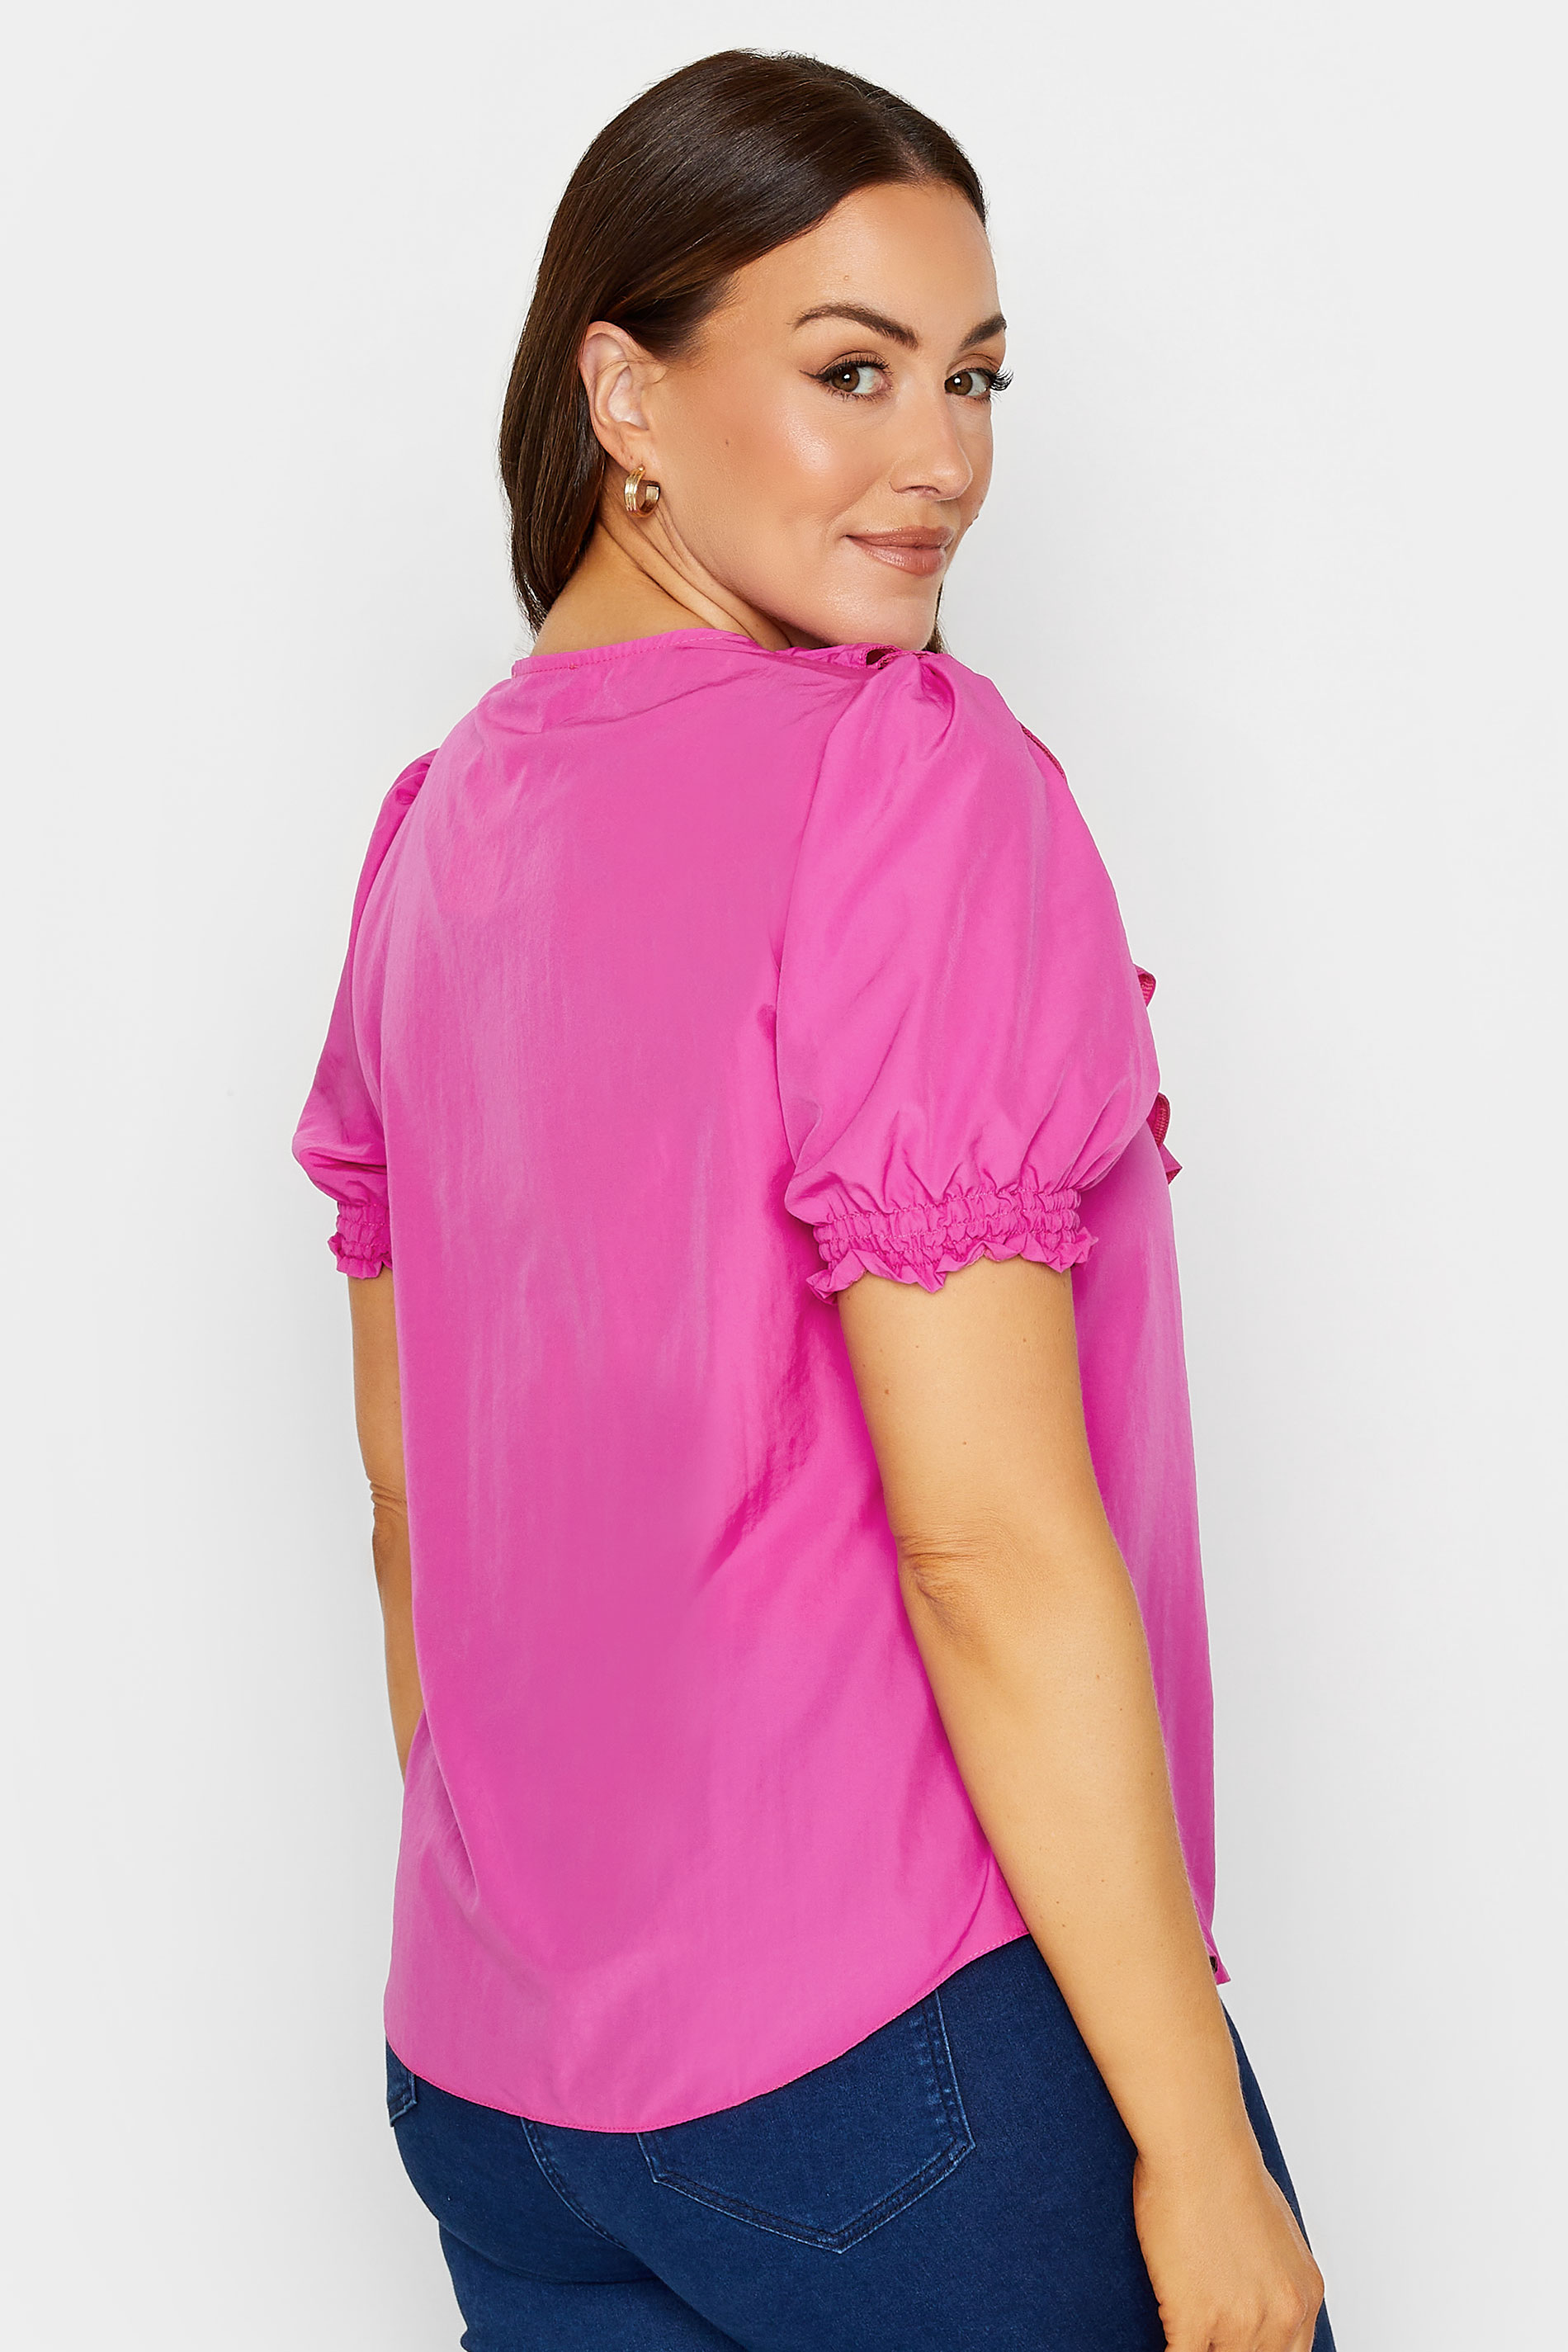 M&Co Bright Pink Frill Front Blouse | M&Co 3